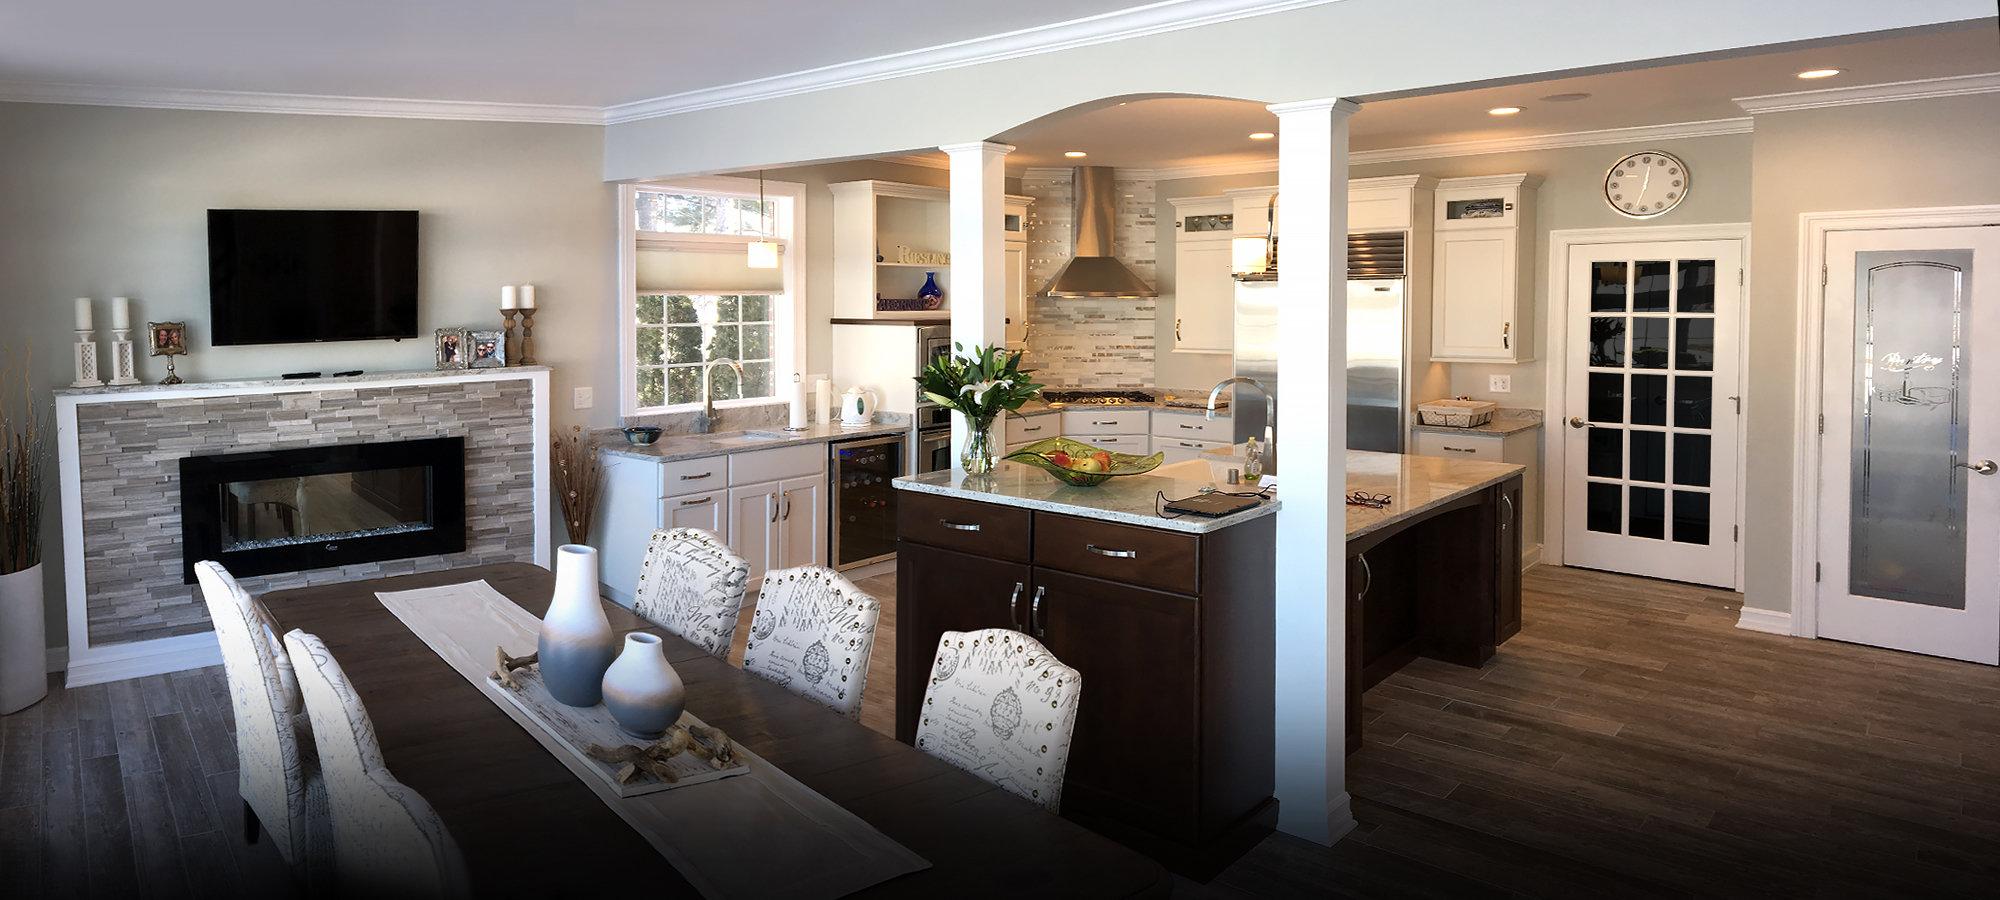 Featured Kitchen remodel from Grafton, Wisconsin